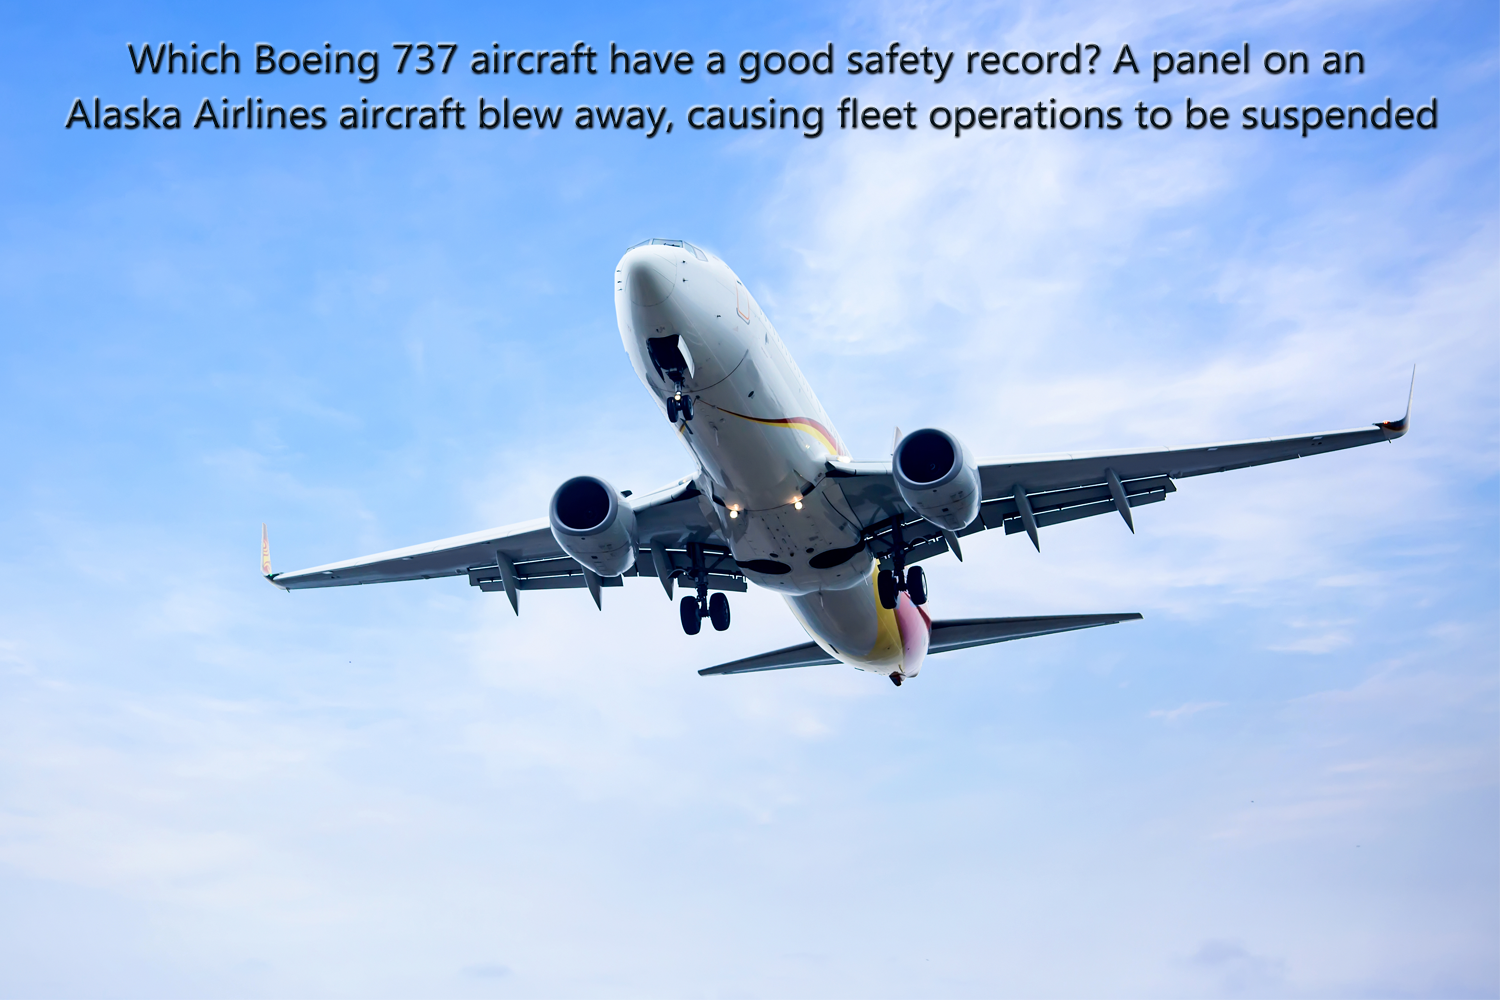 Which Boeing 737 aircraft have a good safety record? A panel on an Alaska Airlines aircraft blew away, causing fleet operations to be suspended